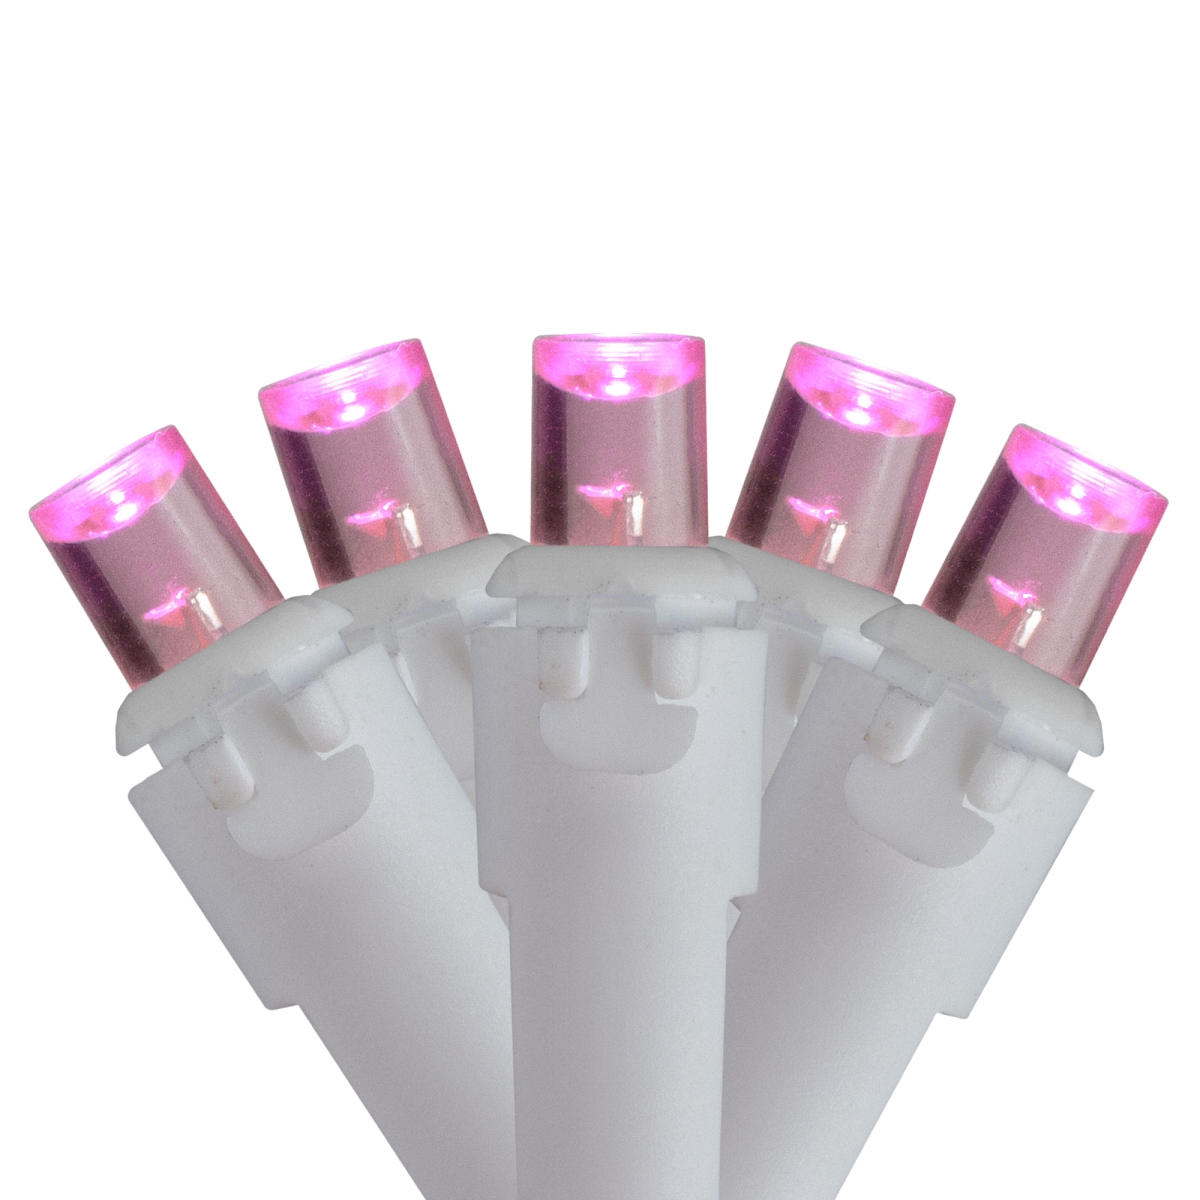 Picture of Brite Star 34186425 Pink LED Wide Angle Icicle Christmas Lights - 6 ft. White Wire - Set of 70